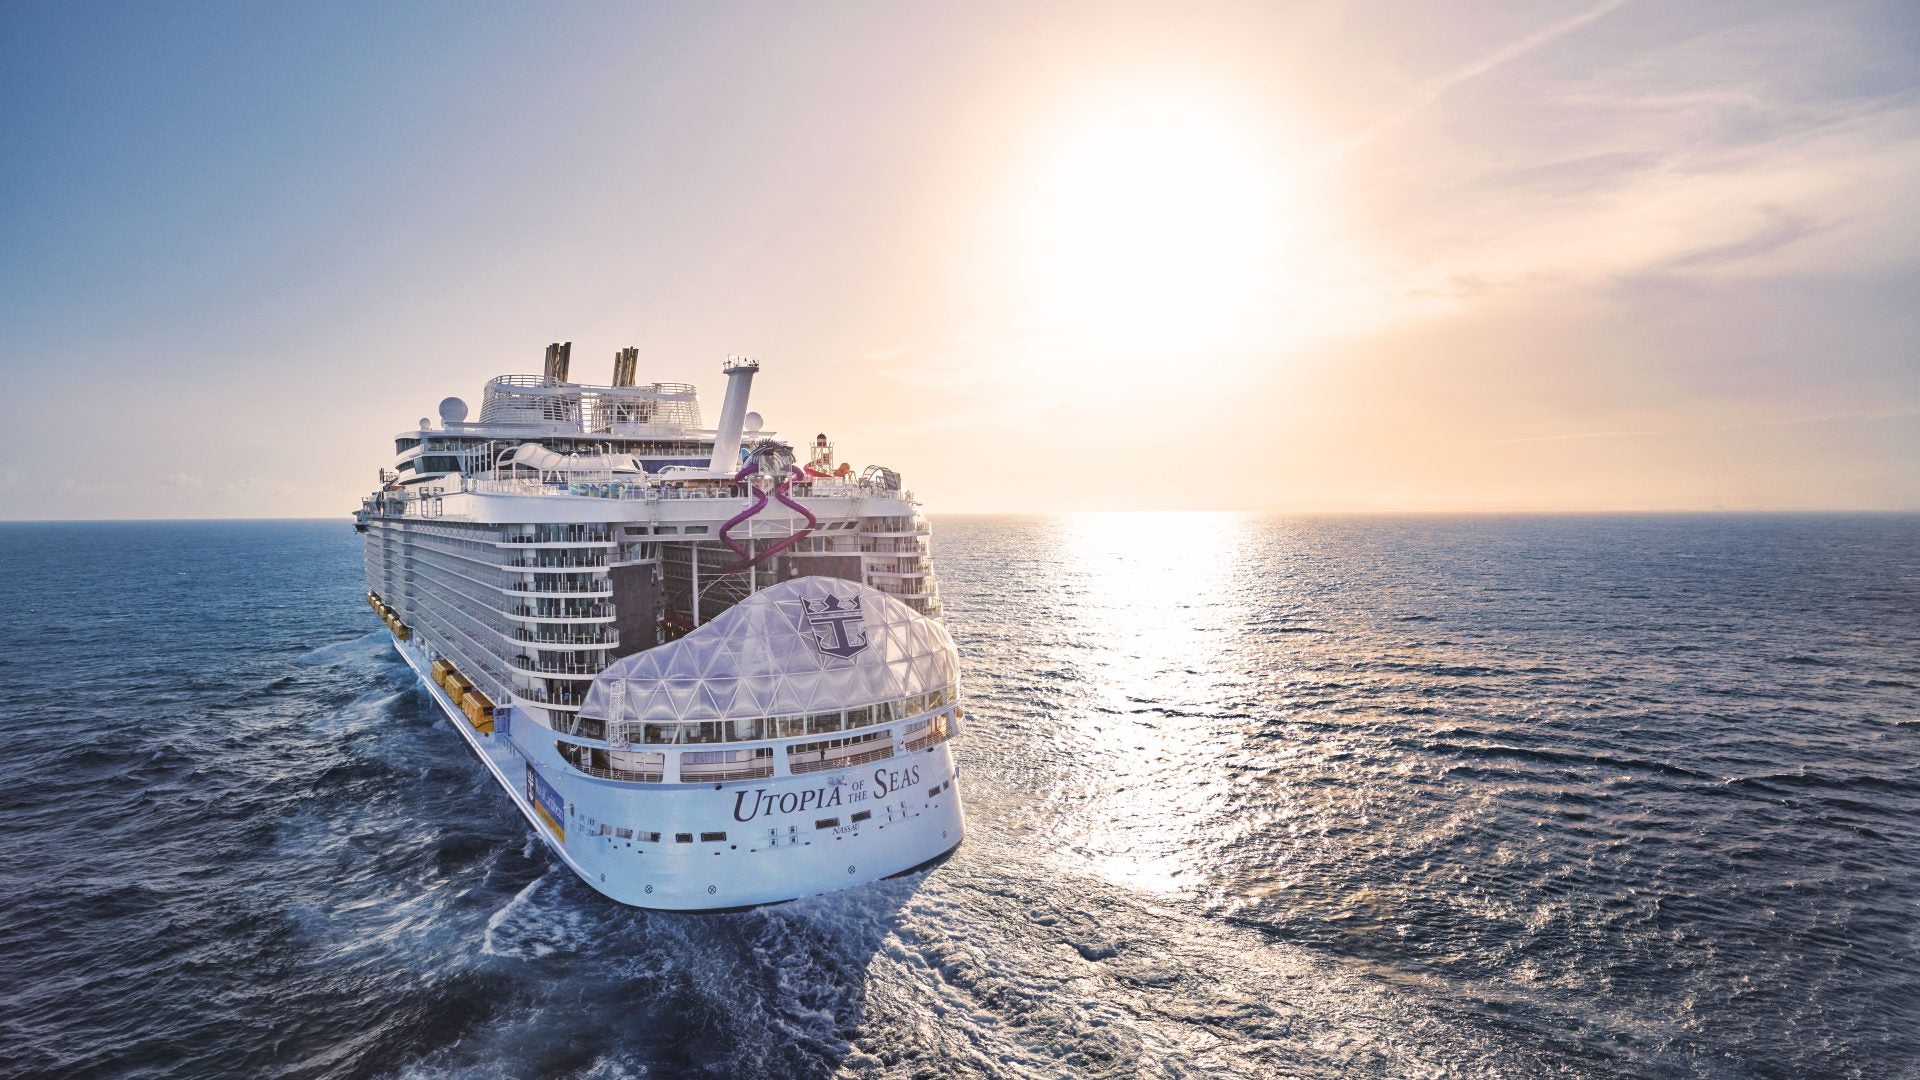 Royal Caribbean Has Curated The Perfect Three-Night Cruise With Its Latest Ship, Utopia Of The Seas